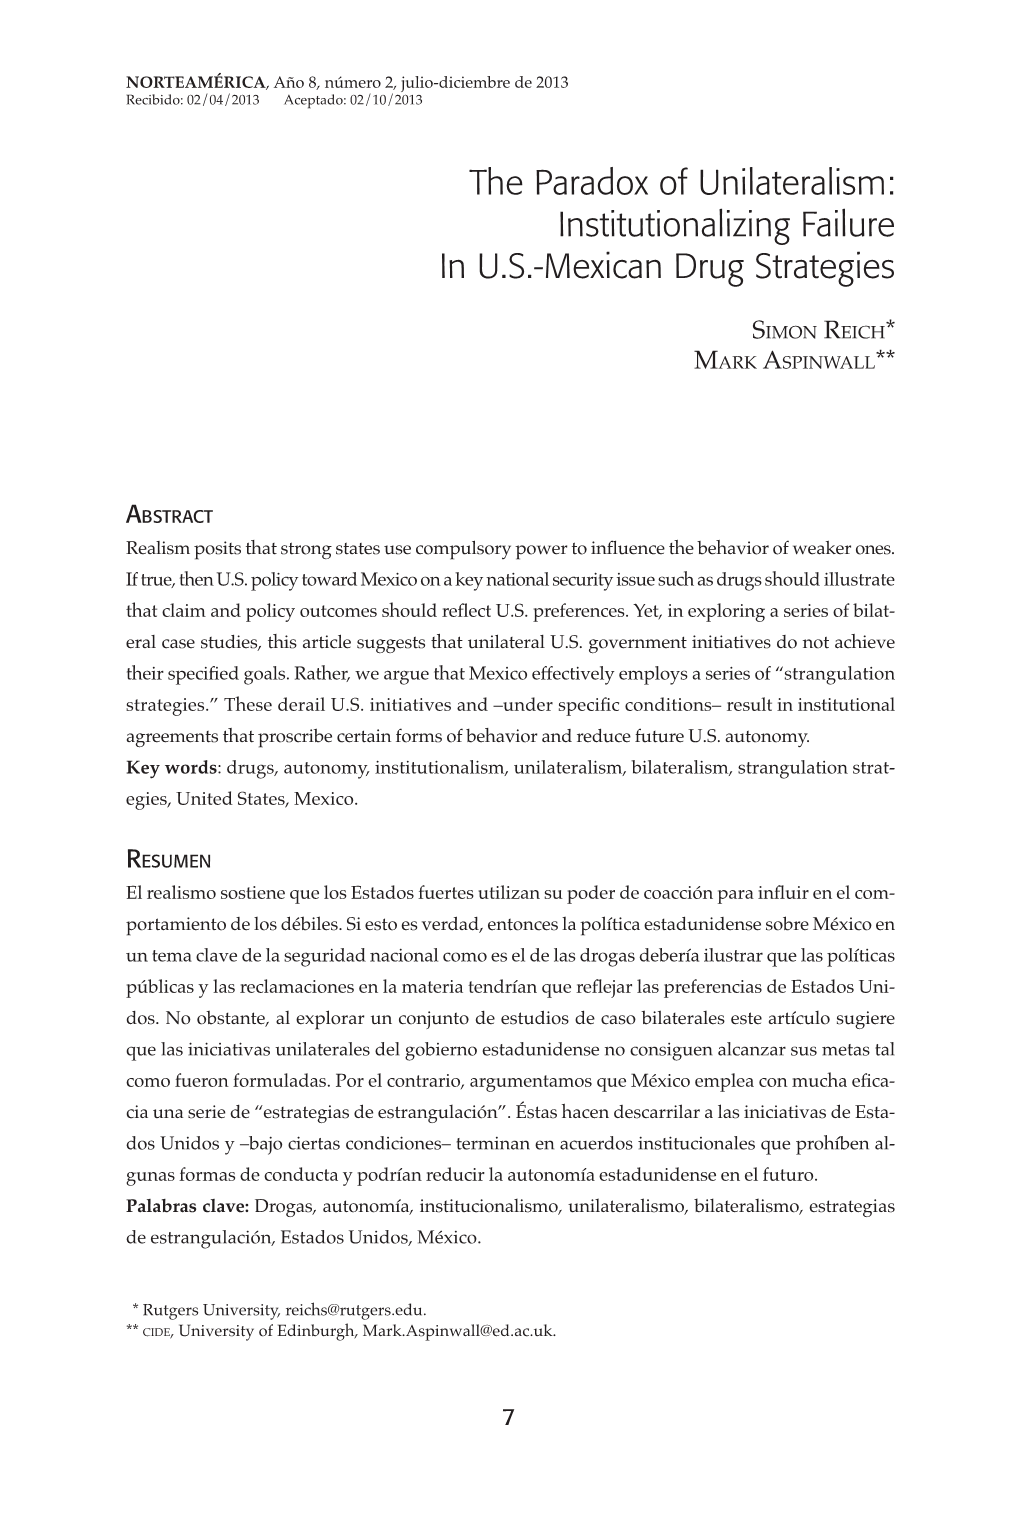 Institutionalizing Failure in US-Mexican Drug Strategies